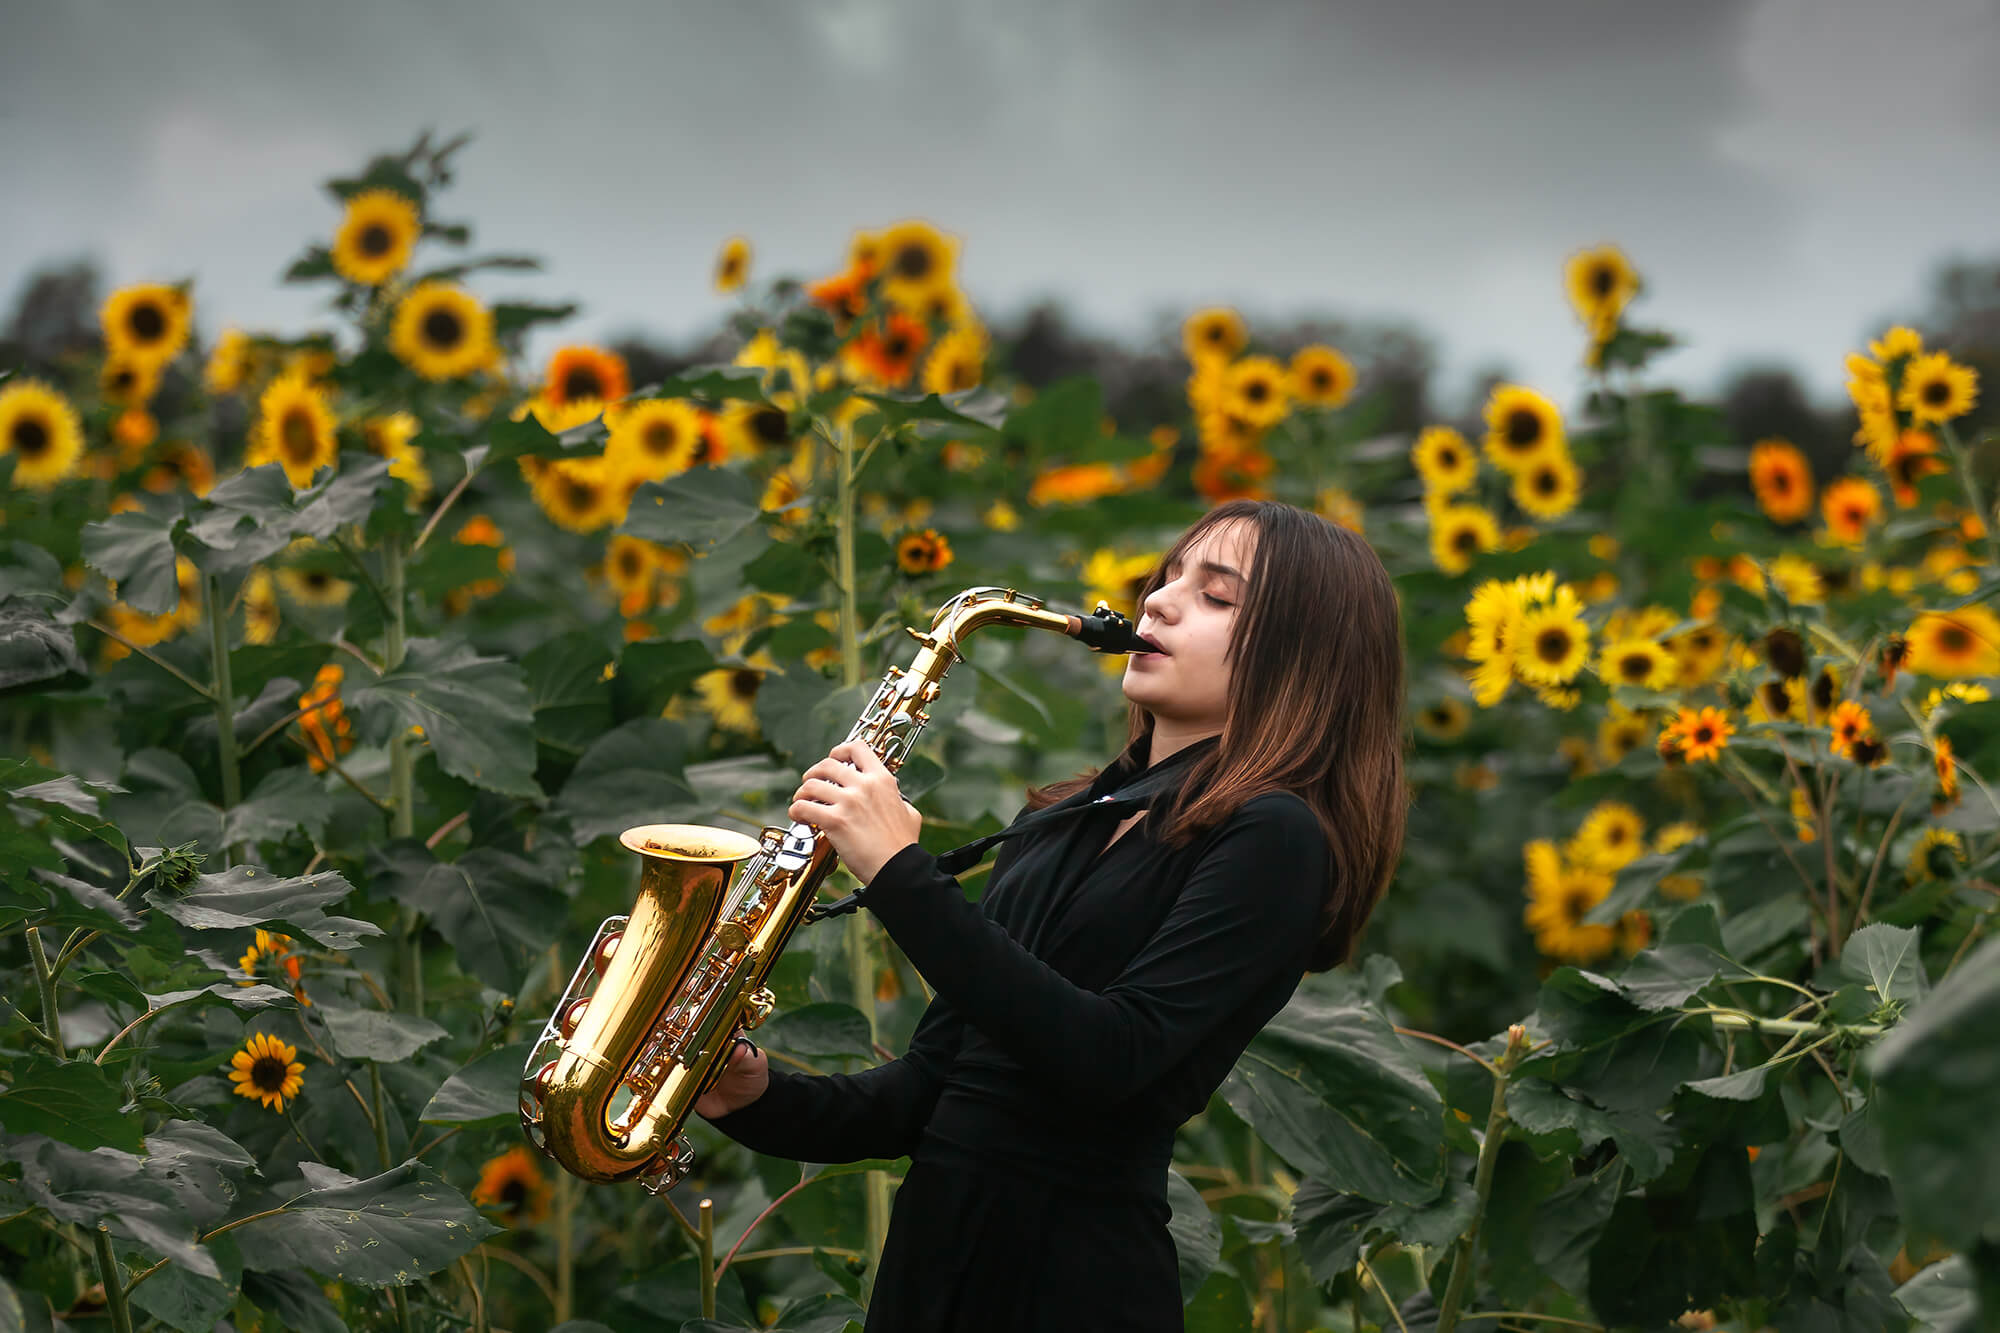 Teenager girl playing the saxophone with sunflowers o the background right next to Vivaldi Music Academy in Houston, Texas.